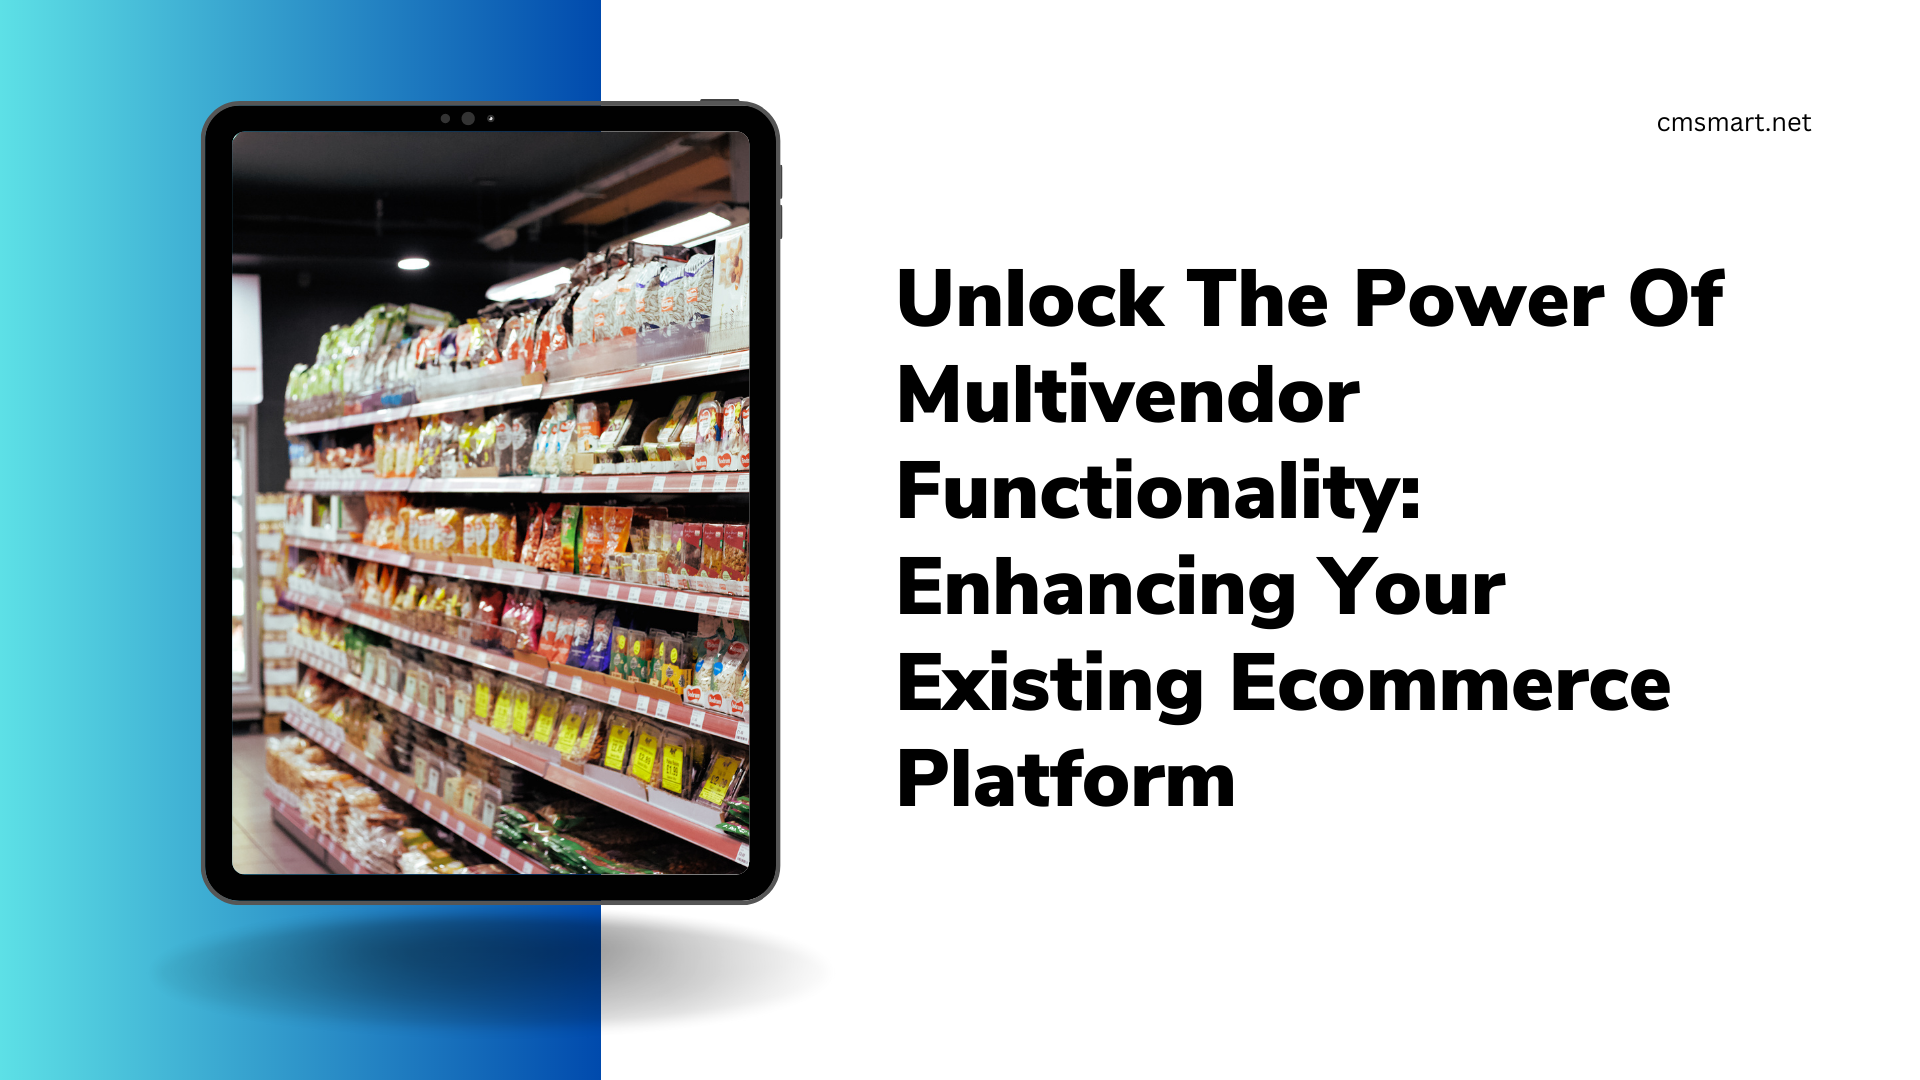 Unlock The Power Of Multivendor Functionality: Enhancing Your Existing Ecommerce Platform